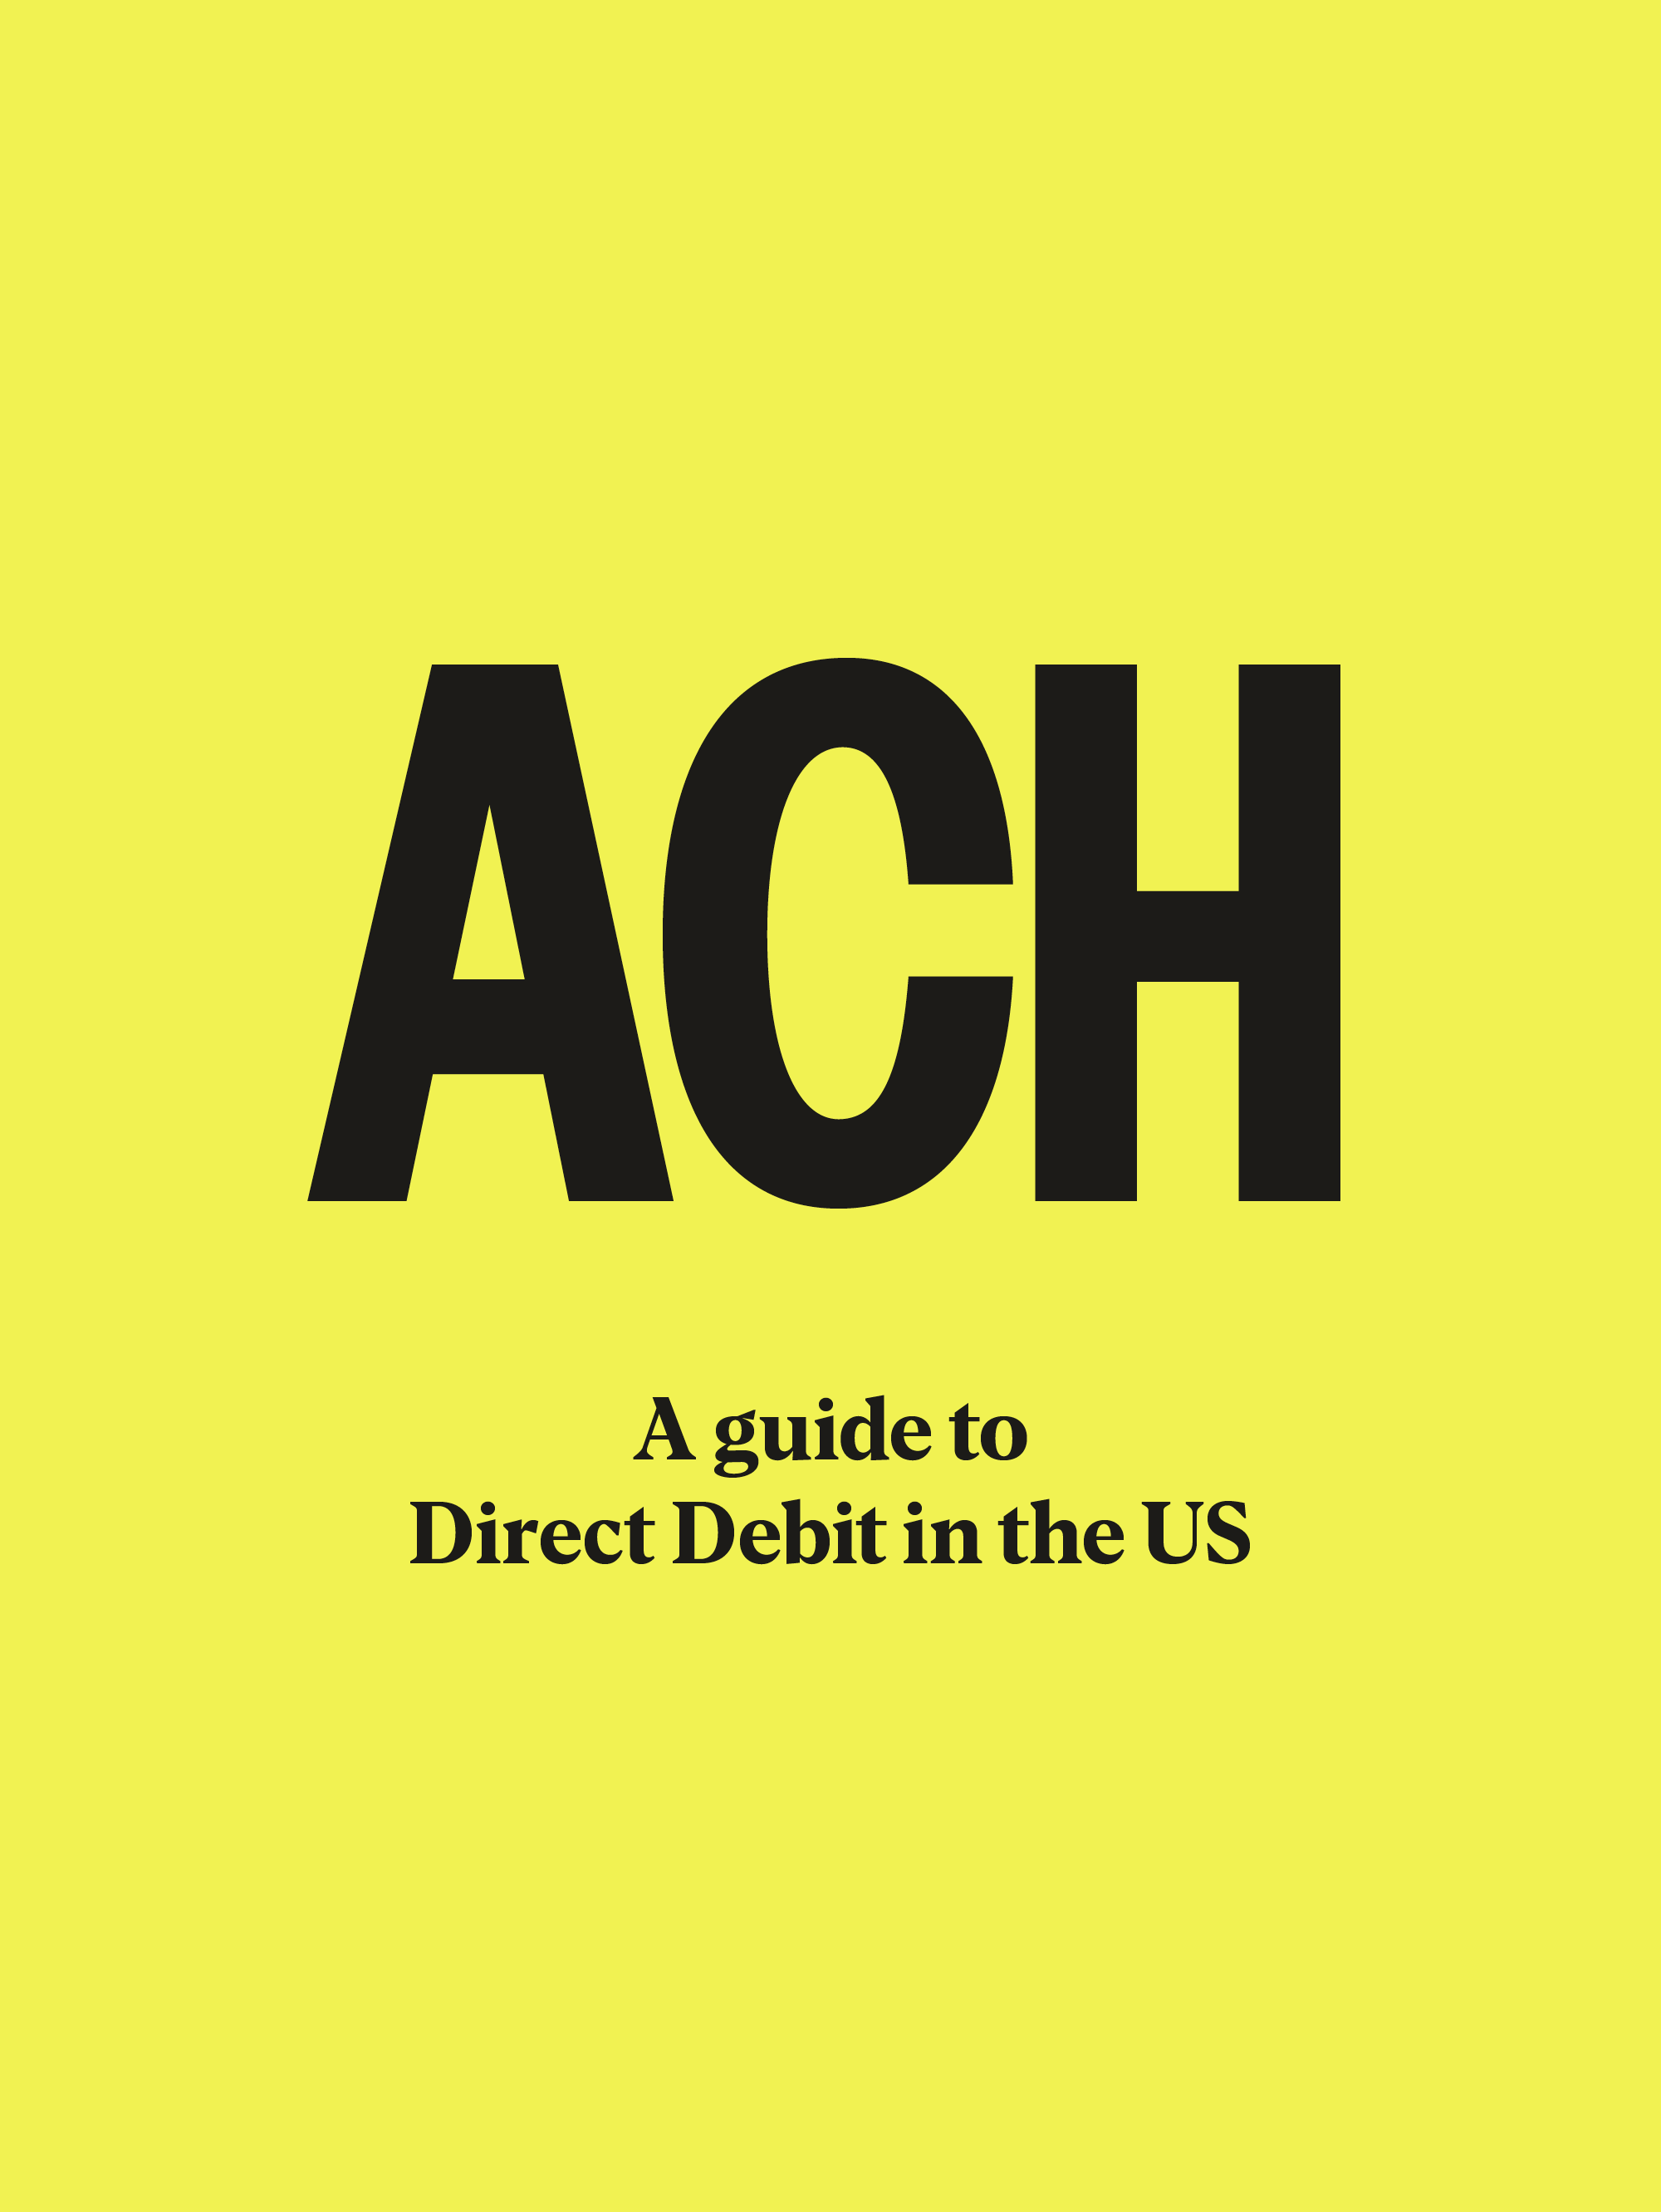 Read our comprehensive guide to ACH Payments